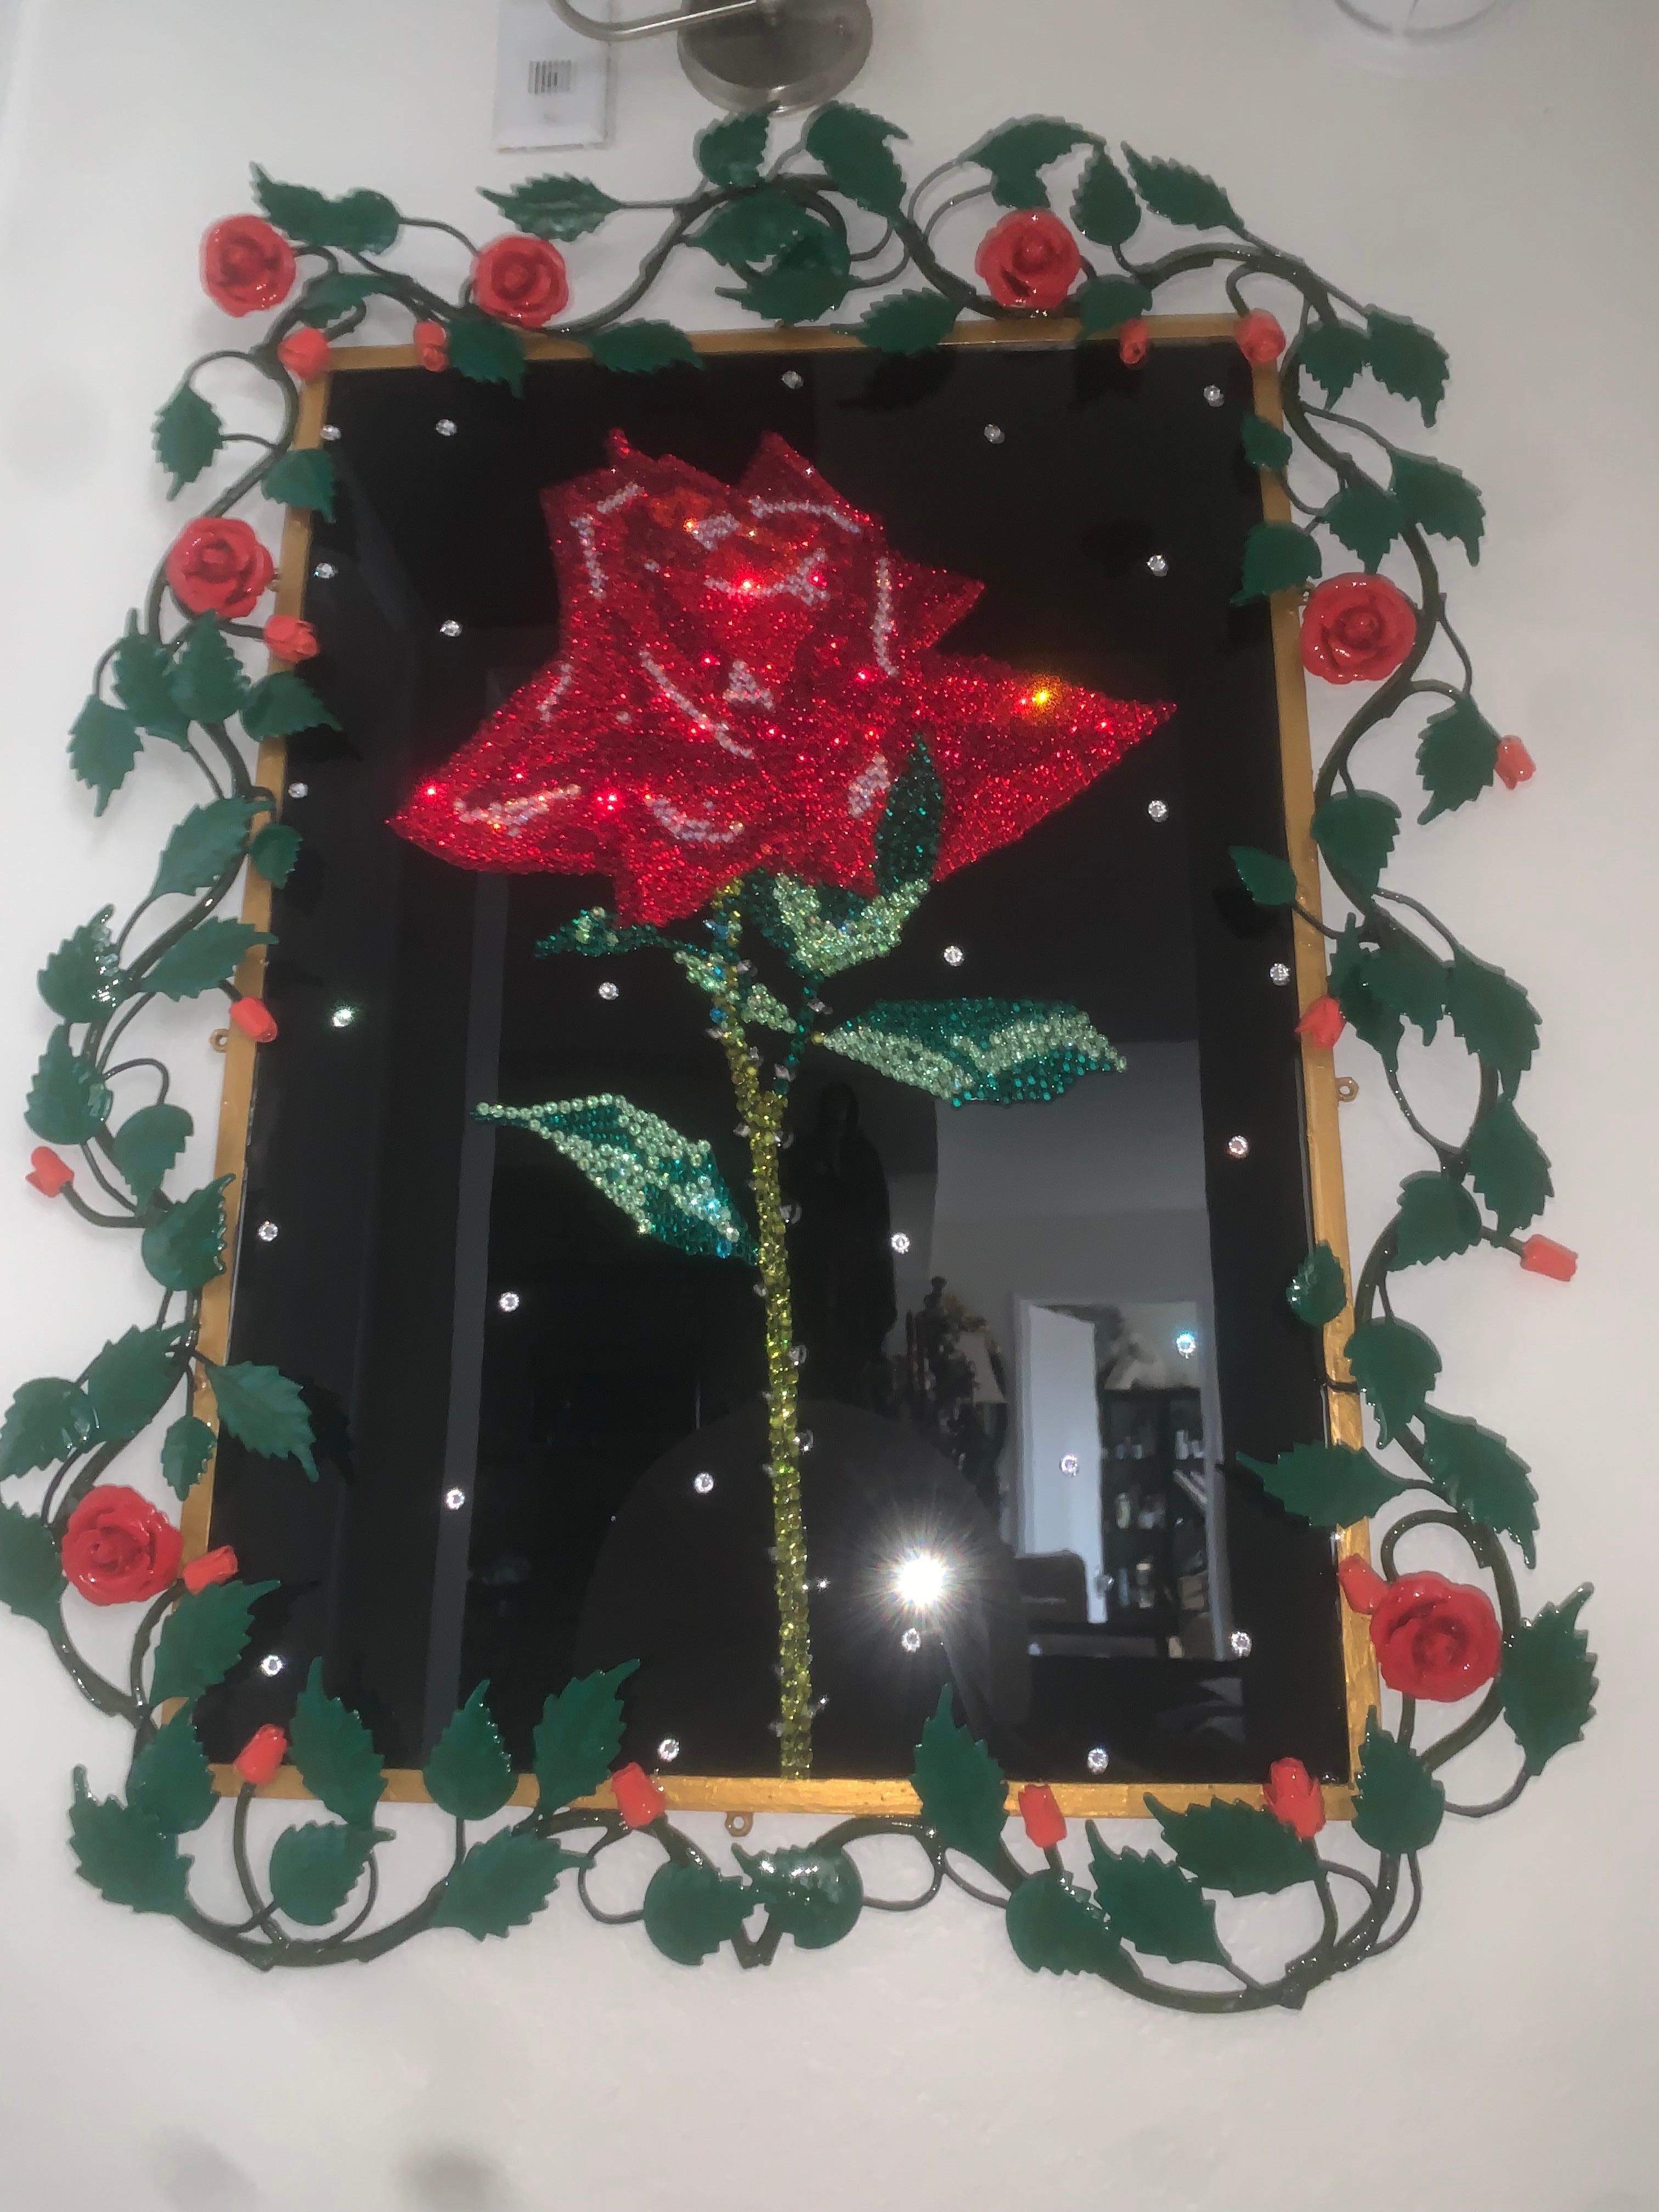 THE FOREVER LOVE ROSE (Original And One Of A Kind Mixed Media Artwork) For Sale 15